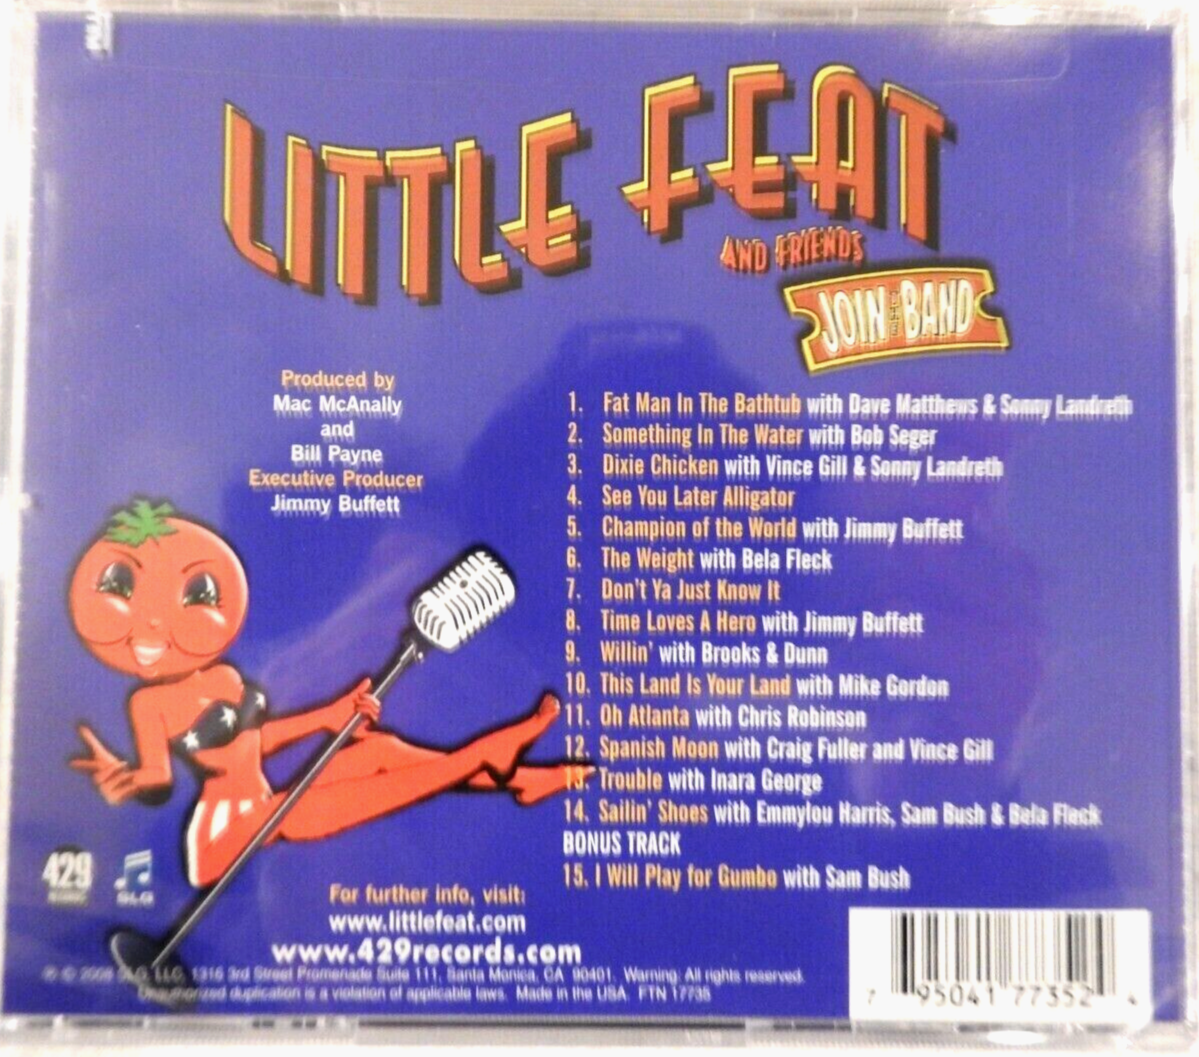 Primary image for Little Feat and Friends "Join The Band" - Seger, Buffett with Bonus Track NEW CD